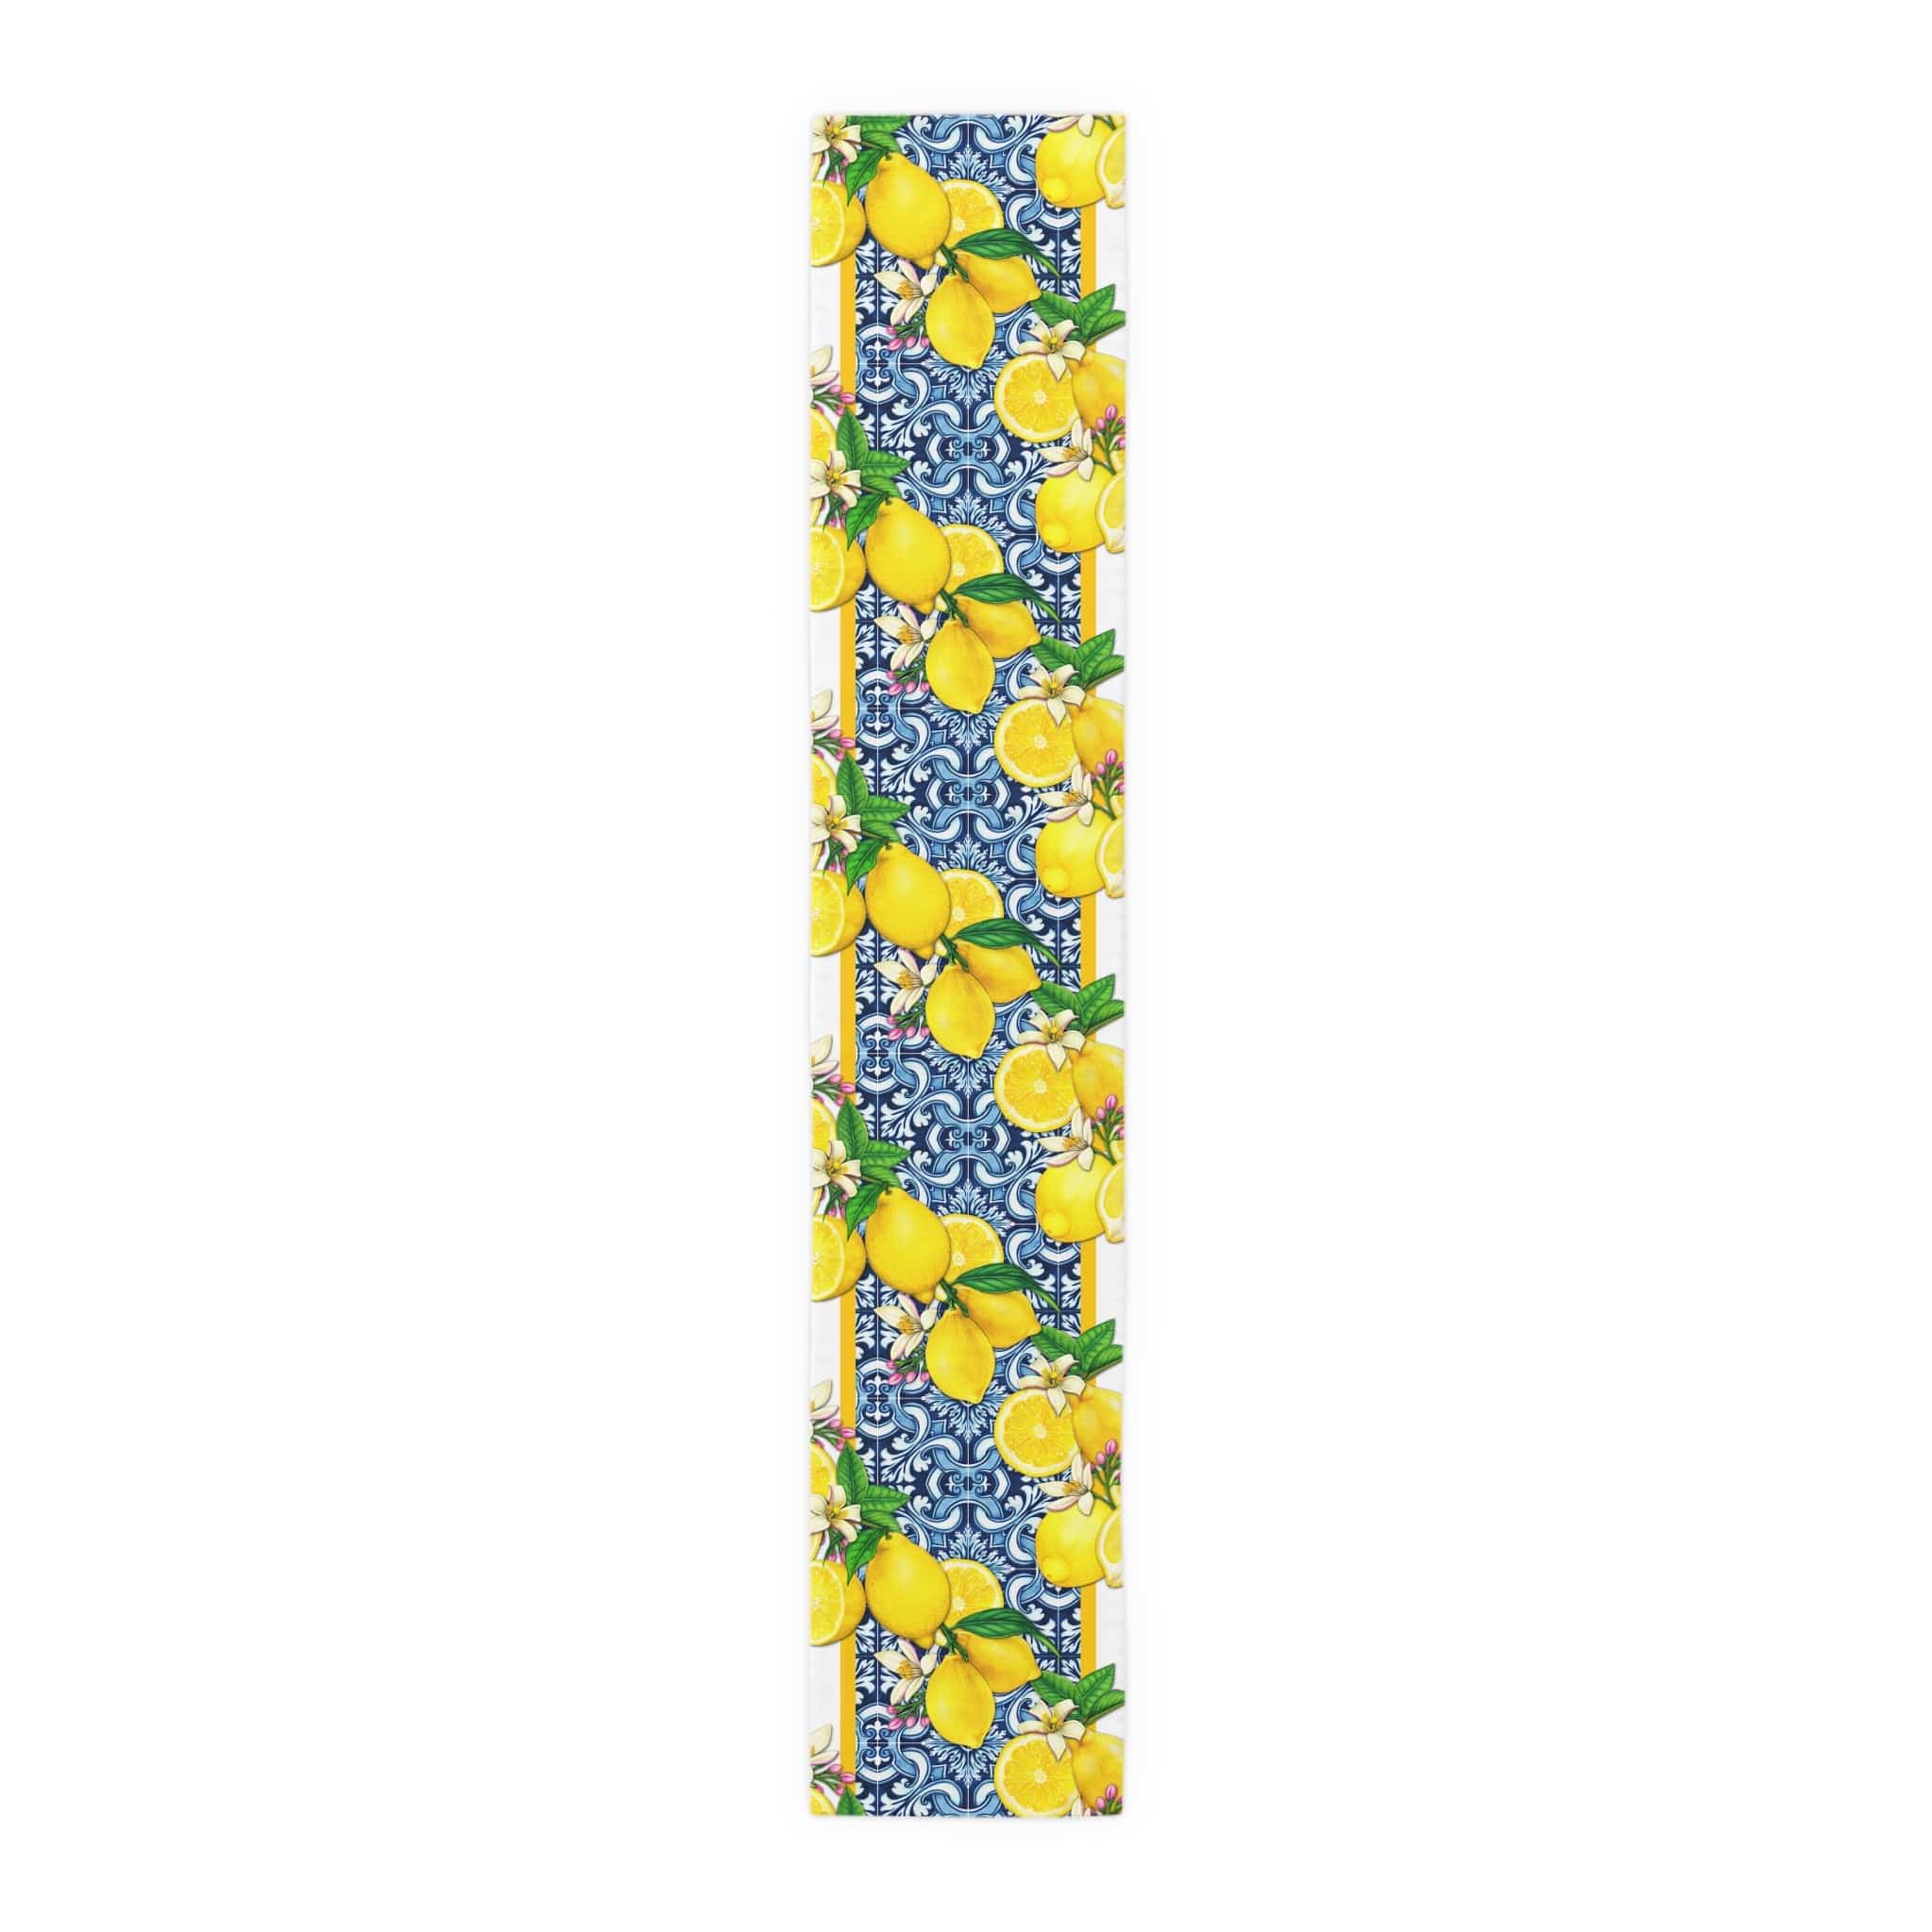 Kate McEnroe New York Cobalt Blue and Yellow Lemon &amp; Tiles Table Runner, Cotton Twill or Polyester, Mediterranean Citrus Floral Dining Table Centerpiece, Unique GiftsTable Runners59844087701463039373